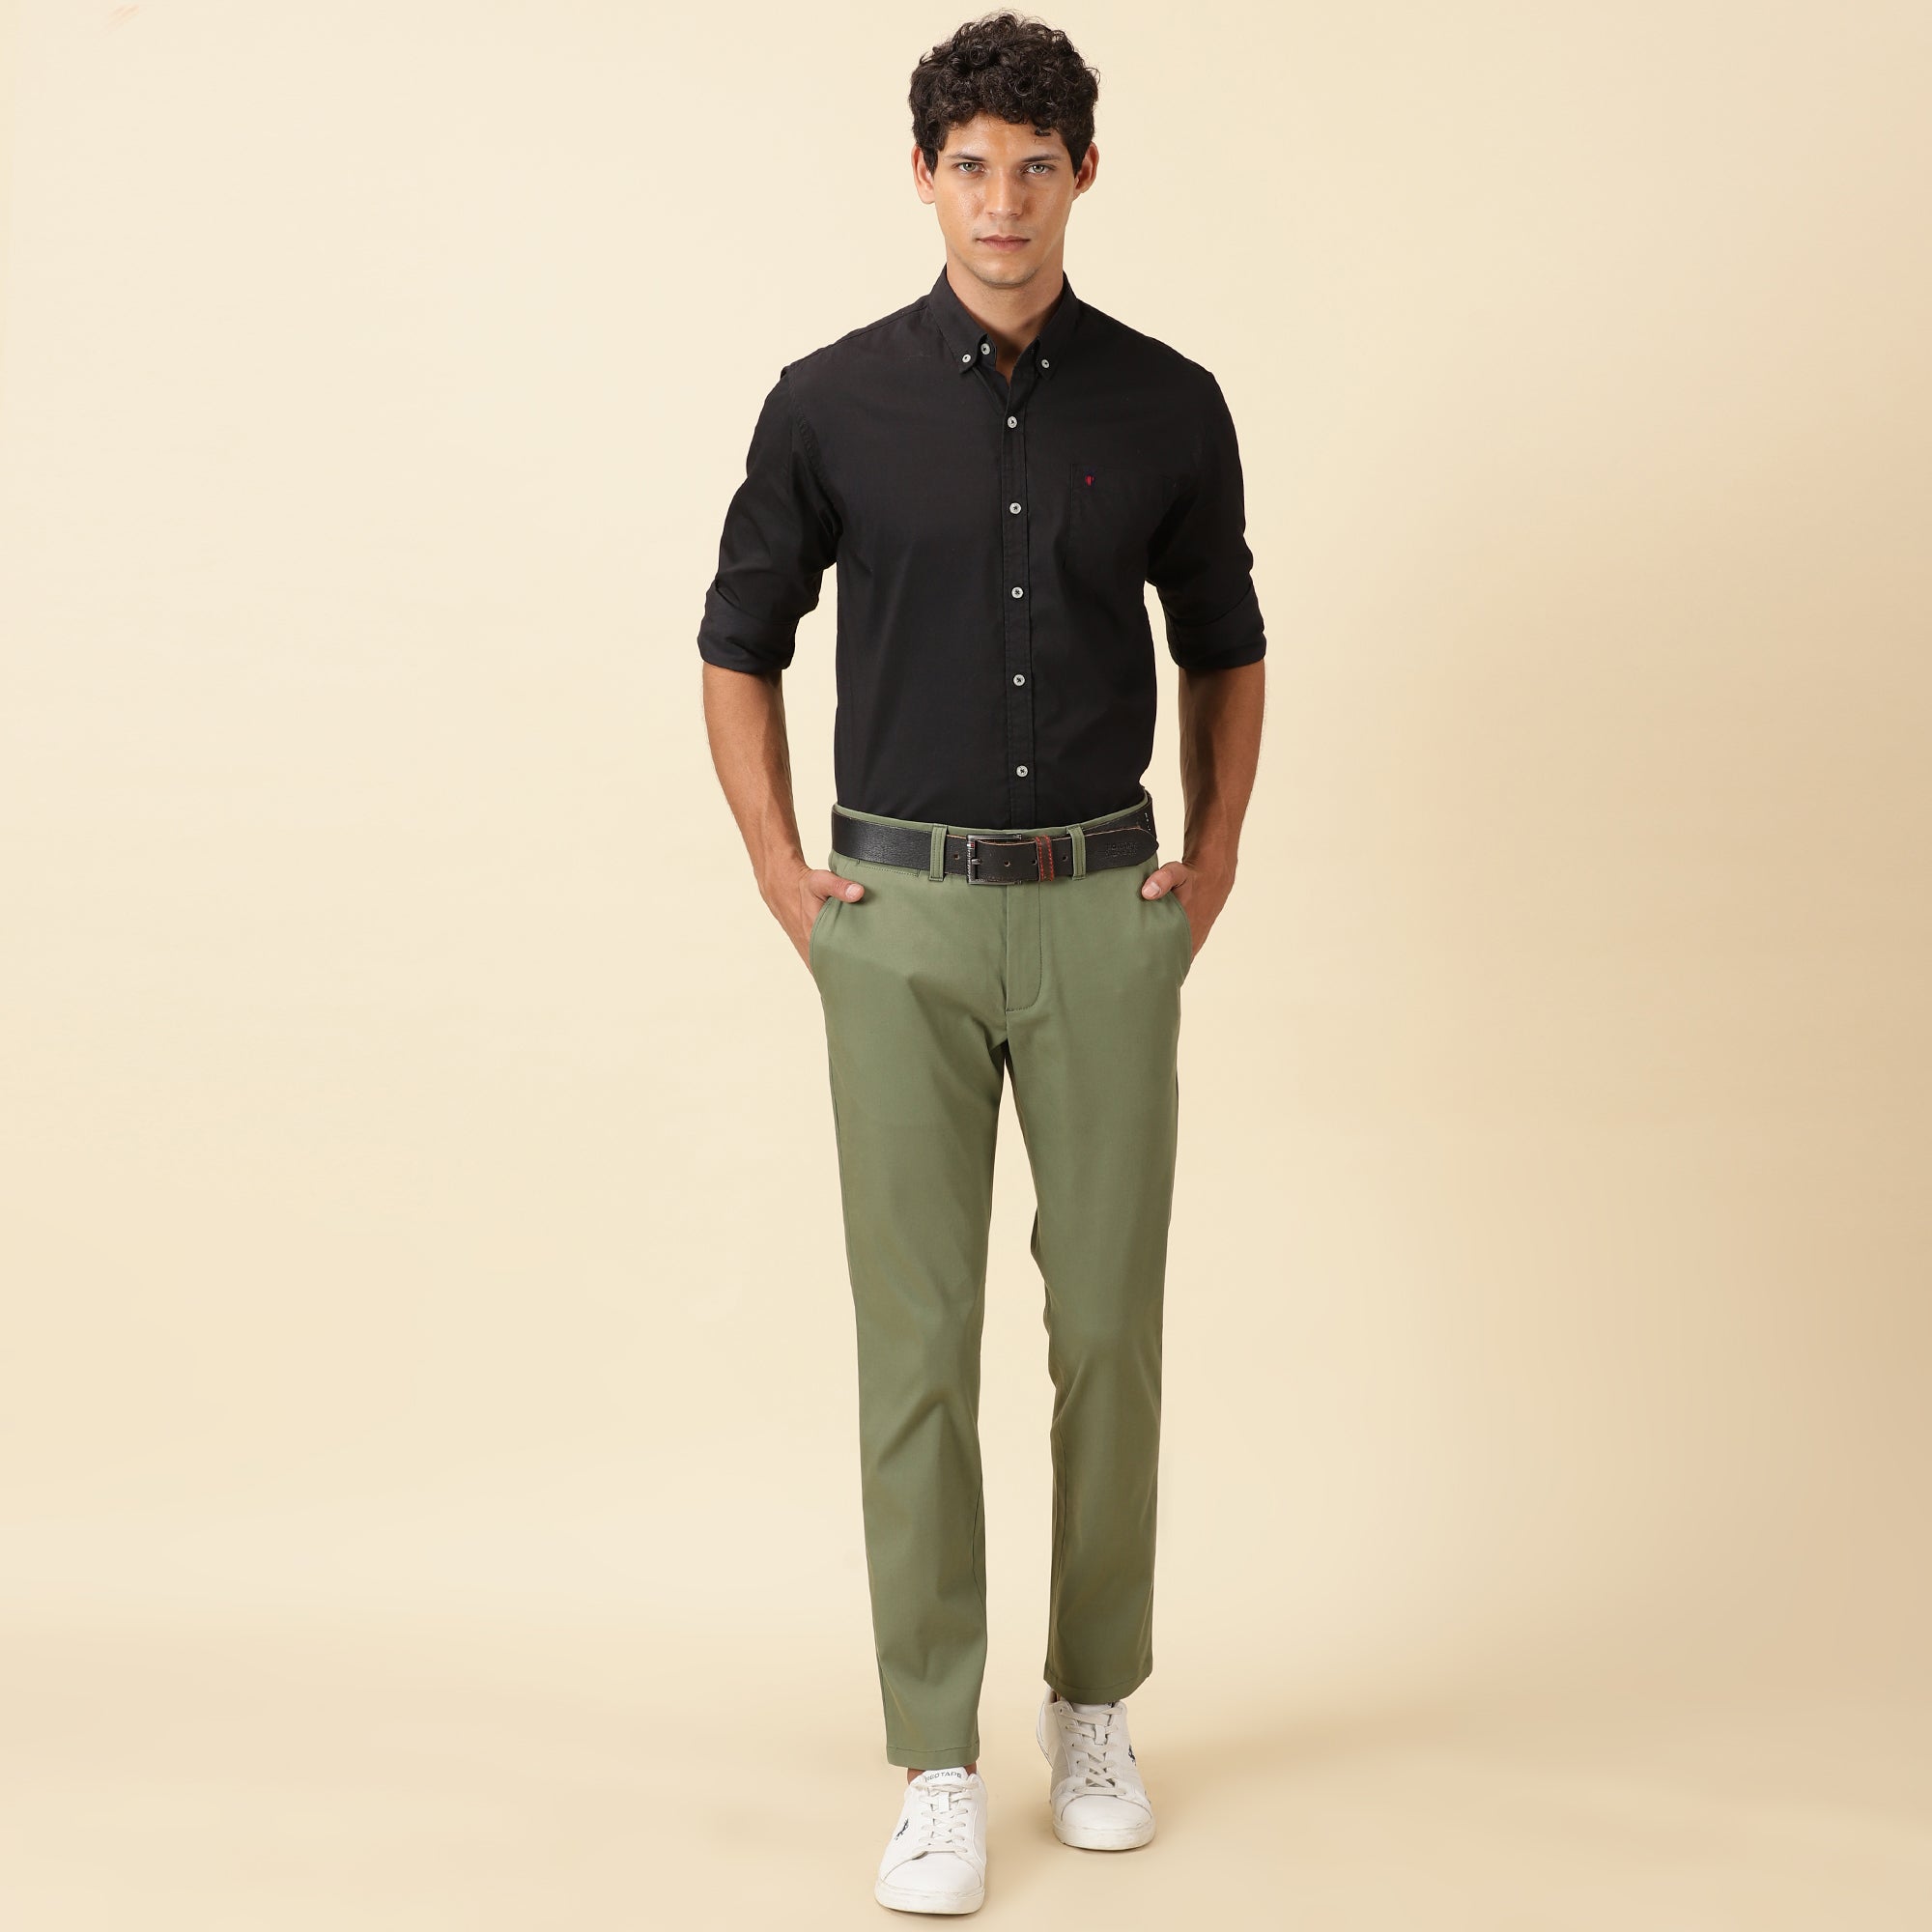 Regular Fit Luxe Chinos - Olivine Green